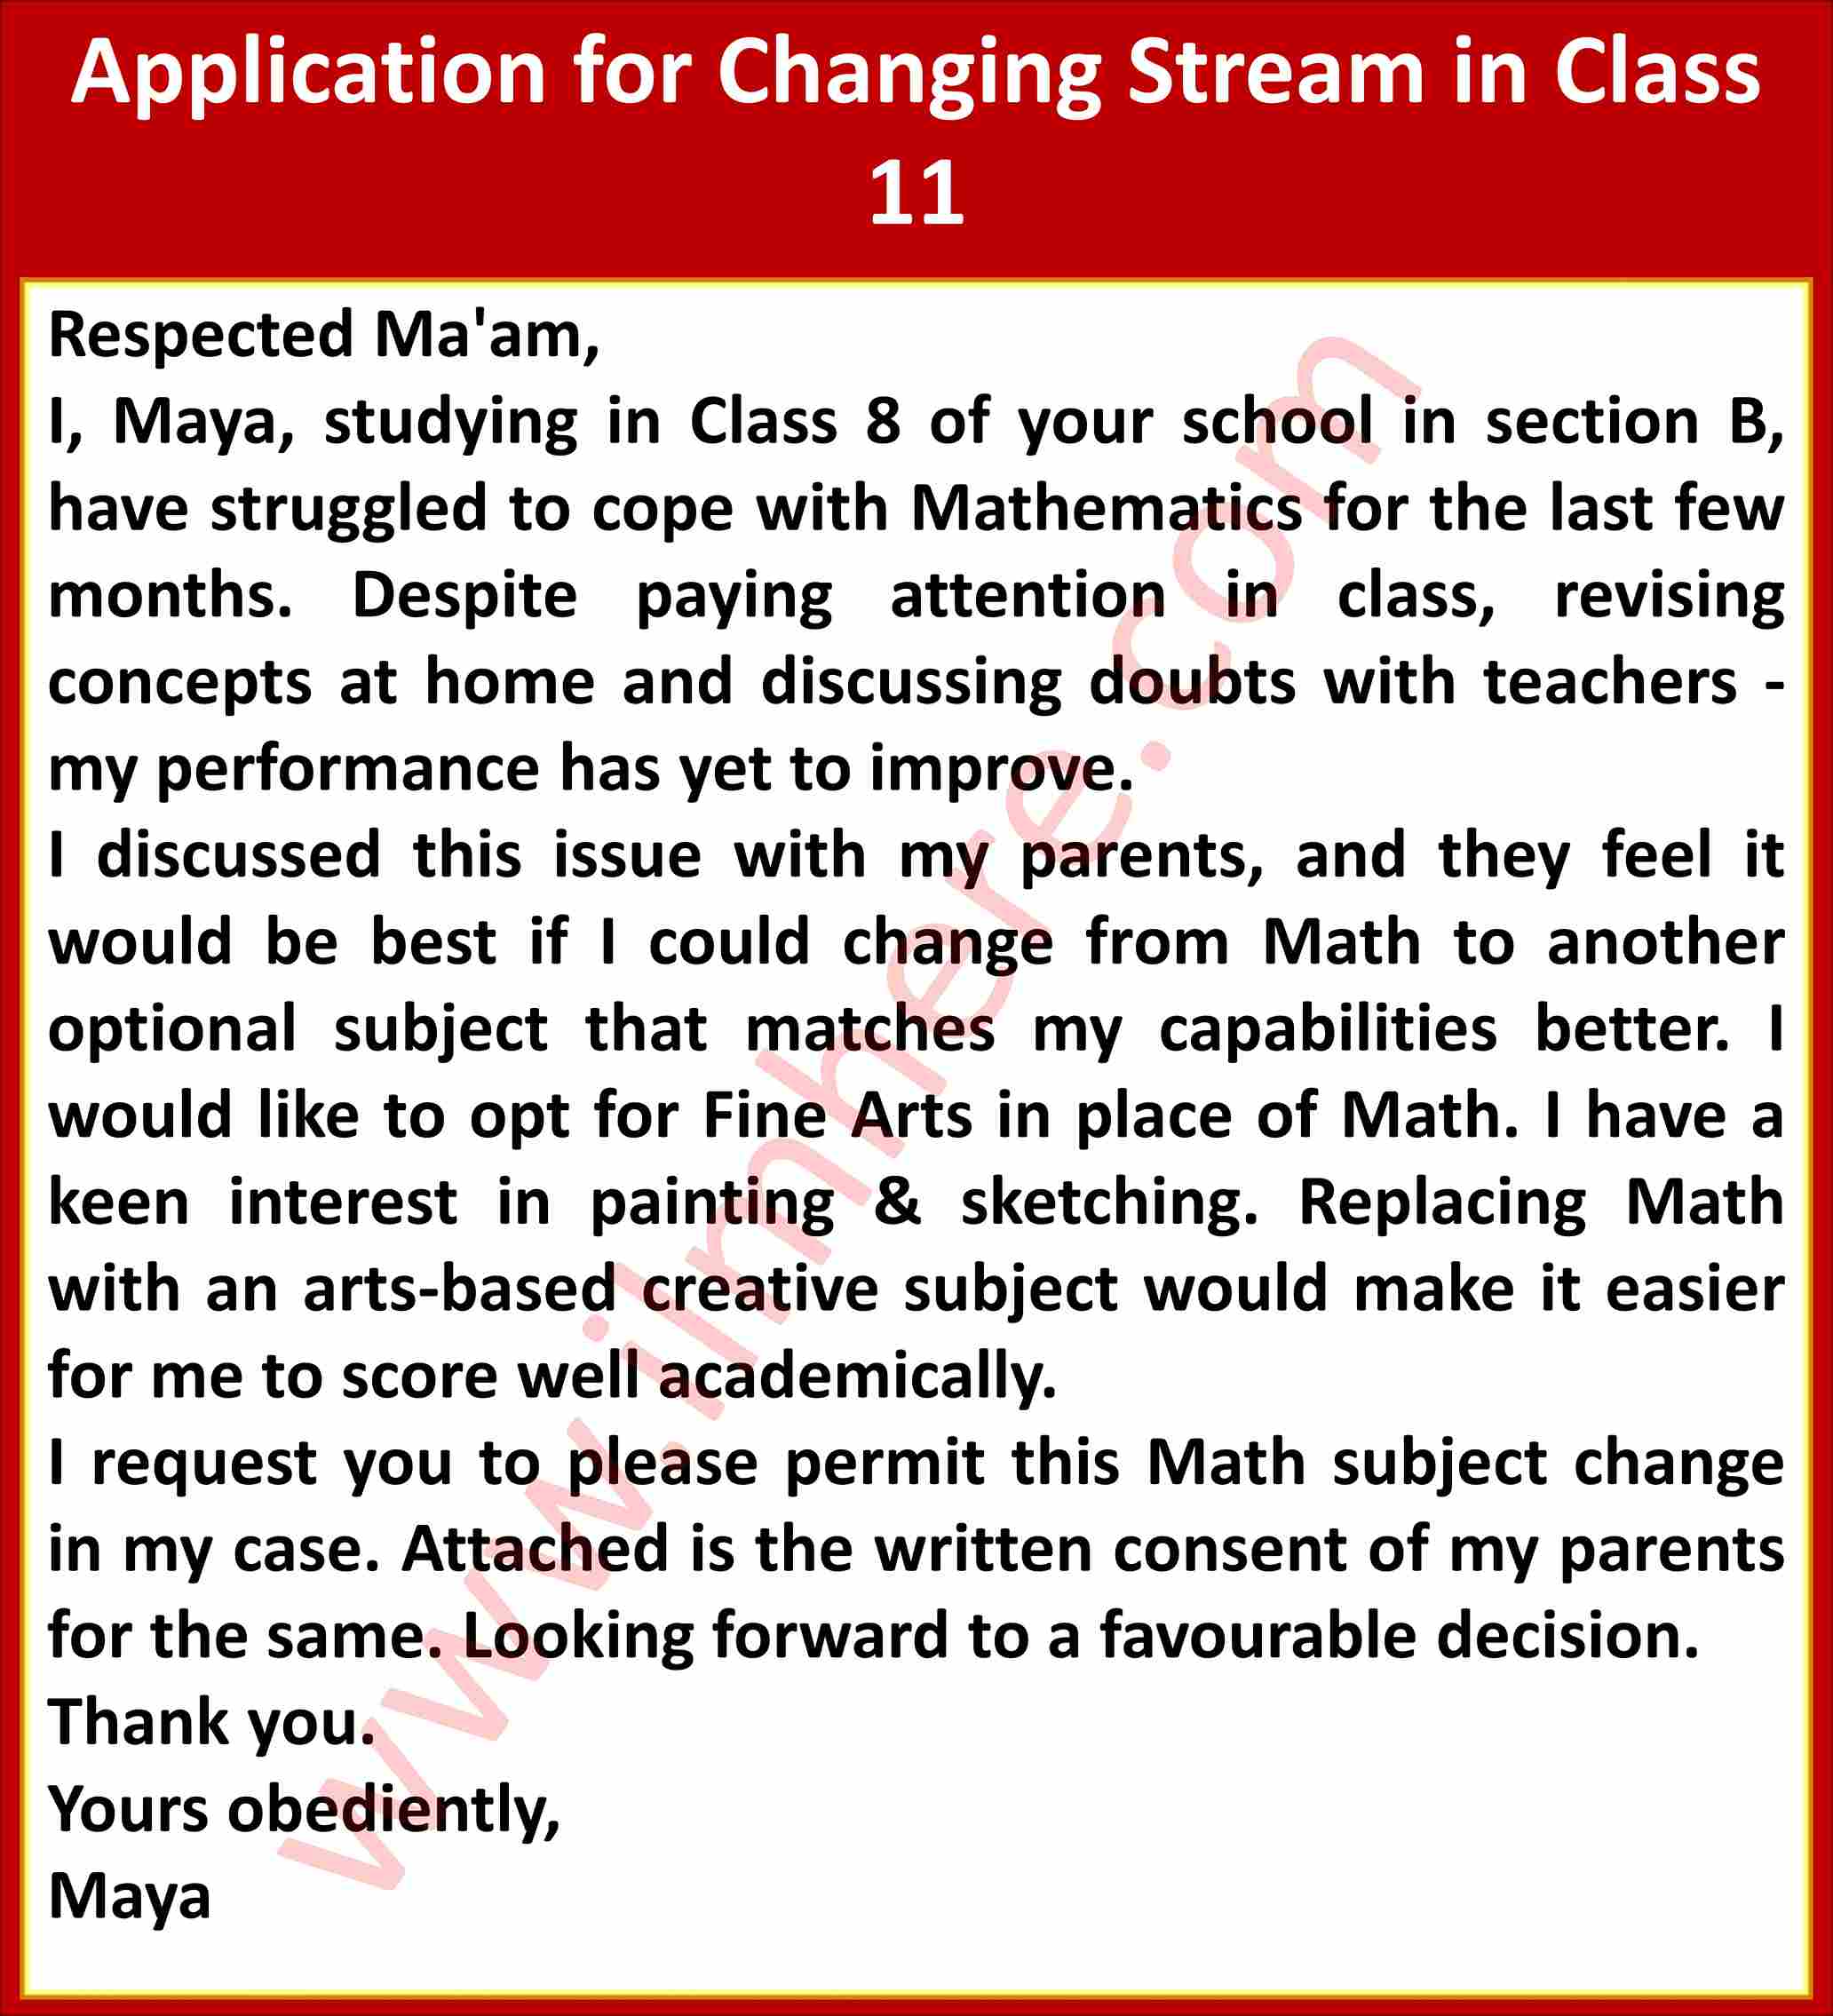 Application for Subject Change (class 10,11,12)